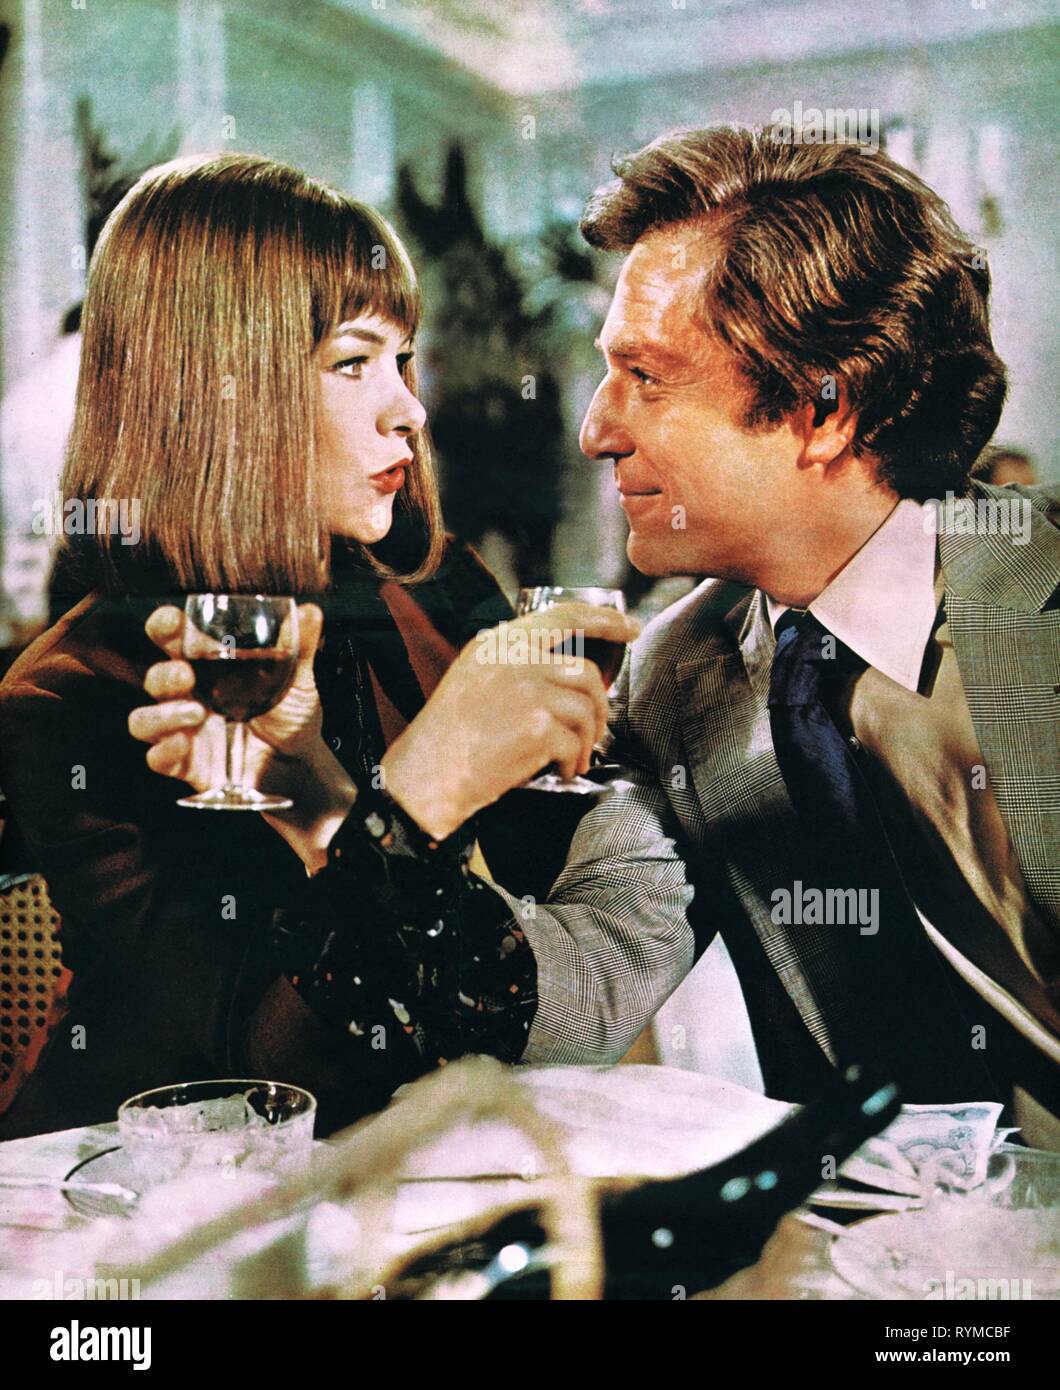 A Touch Of Class Glenda Jackson High Resolution Stock Photography and  Images - Alamy